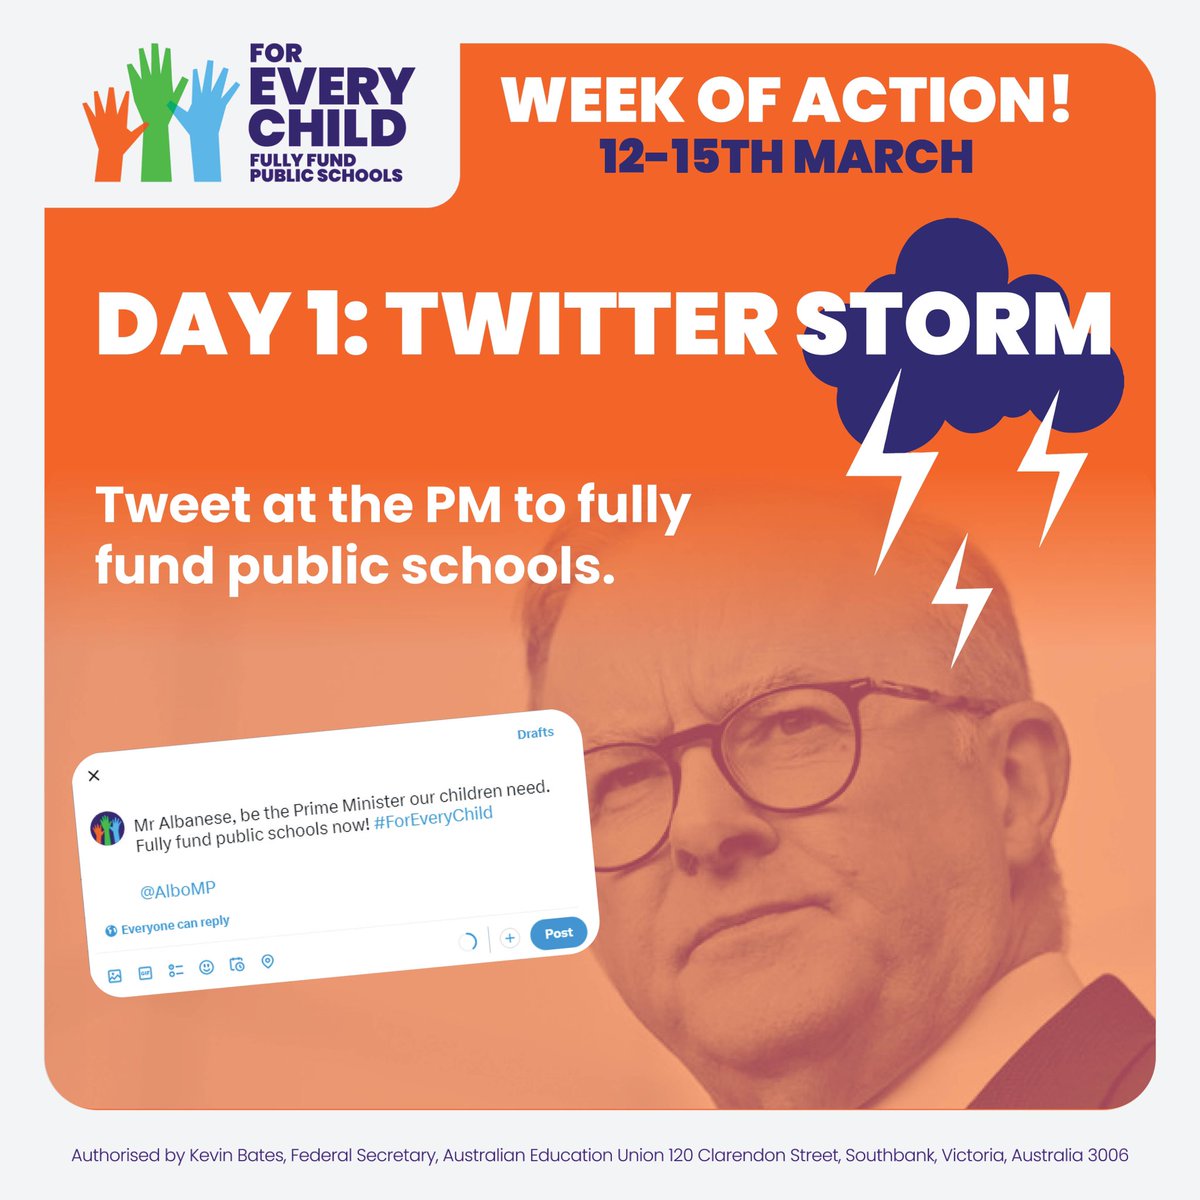 Not one single public school in NSW is fully funded. Teachers and their students are giving 100%, it’s time the PM did the same #ForEveryChild